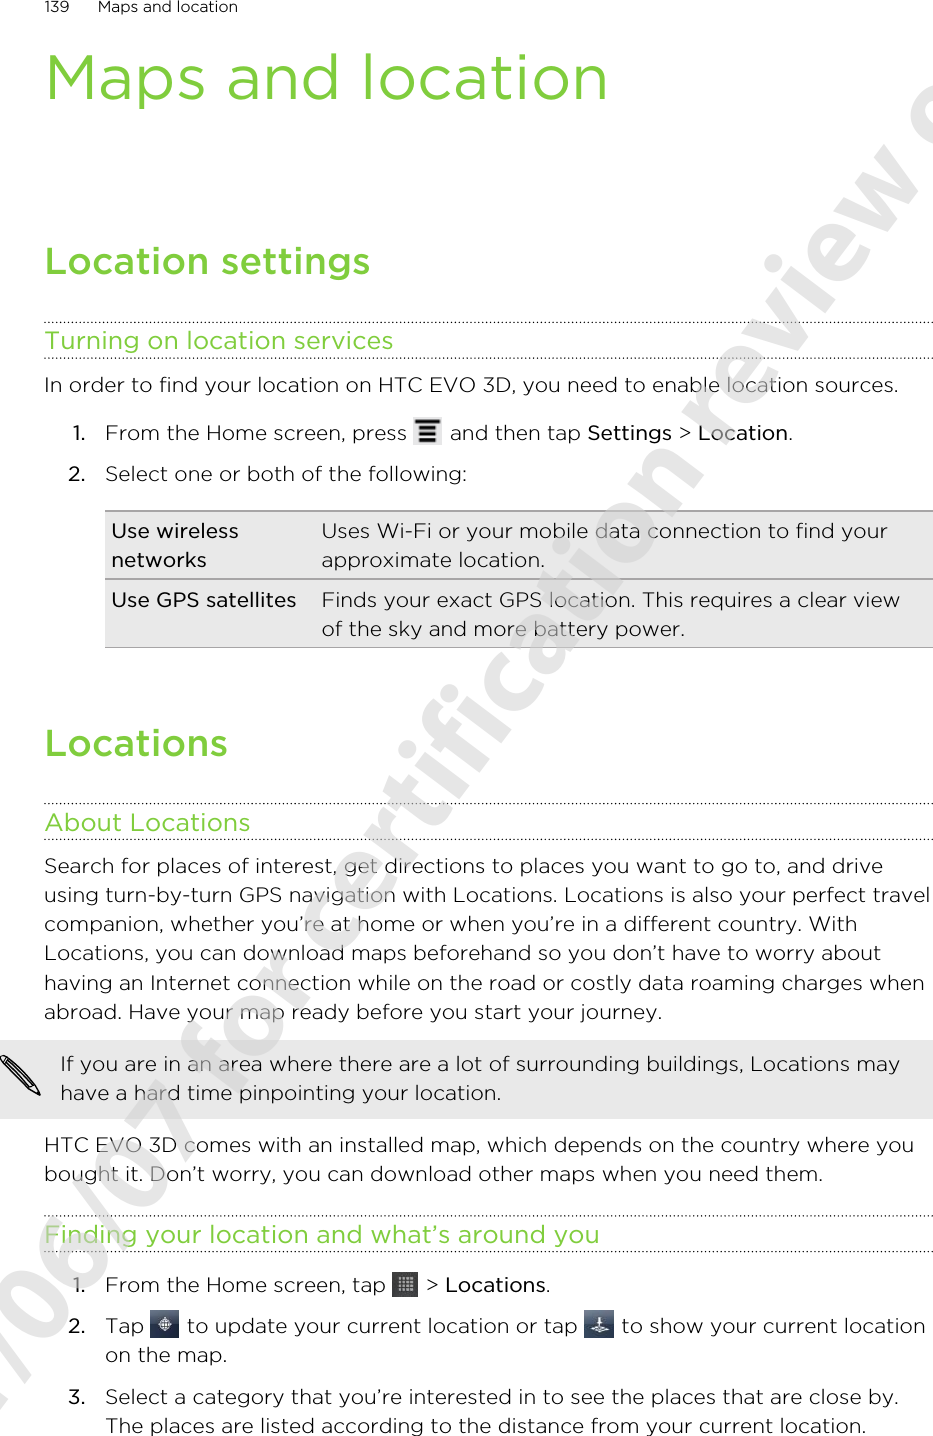 Maps and locationLocation settingsTurning on location servicesIn order to find your location on HTC EVO 3D, you need to enable location sources.1. From the Home screen, press   and then tap Settings &gt; Location.2. Select one or both of the following:Use wirelessnetworksUses Wi-Fi or your mobile data connection to find yourapproximate location.Use GPS satellites Finds your exact GPS location. This requires a clear viewof the sky and more battery power.LocationsAbout LocationsSearch for places of interest, get directions to places you want to go to, and driveusing turn-by-turn GPS navigation with Locations. Locations is also your perfect travelcompanion, whether you’re at home or when you’re in a different country. WithLocations, you can download maps beforehand so you don’t have to worry abouthaving an Internet connection while on the road or costly data roaming charges whenabroad. Have your map ready before you start your journey.If you are in an area where there are a lot of surrounding buildings, Locations mayhave a hard time pinpointing your location.HTC EVO 3D comes with an installed map, which depends on the country where youbought it. Don’t worry, you can download other maps when you need them.Finding your location and what’s around you1. From the Home screen, tap   &gt; Locations.2. Tap   to update your current location or tap   to show your current locationon the map.3. Select a category that you’re interested in to see the places that are close by.The places are listed according to the distance from your current location.139 Maps and location2011/06/07 for certification review only